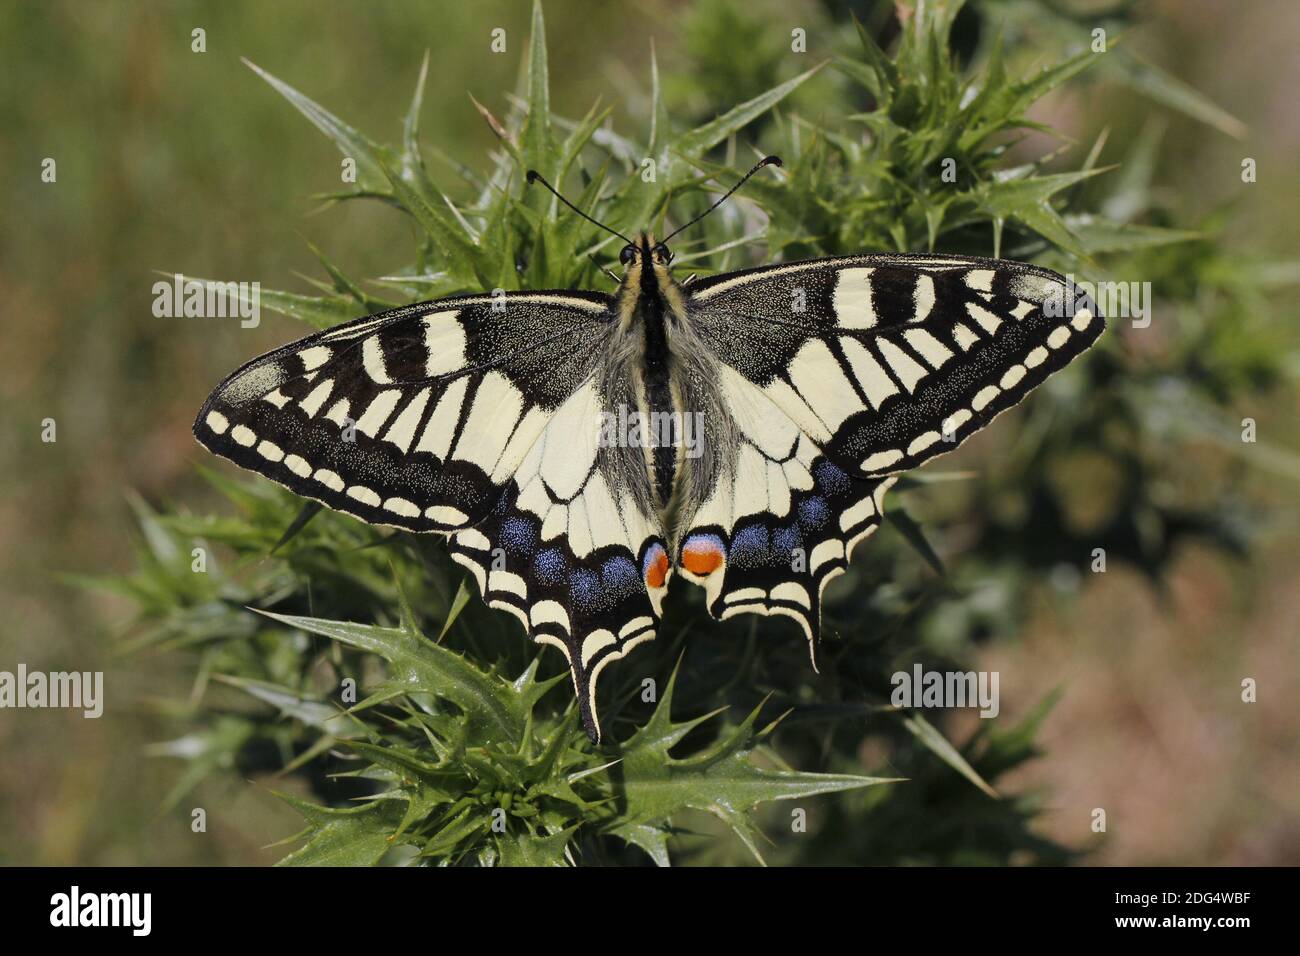 Papilio machaon, Swallowtail butterfly from Italy Stock Photo